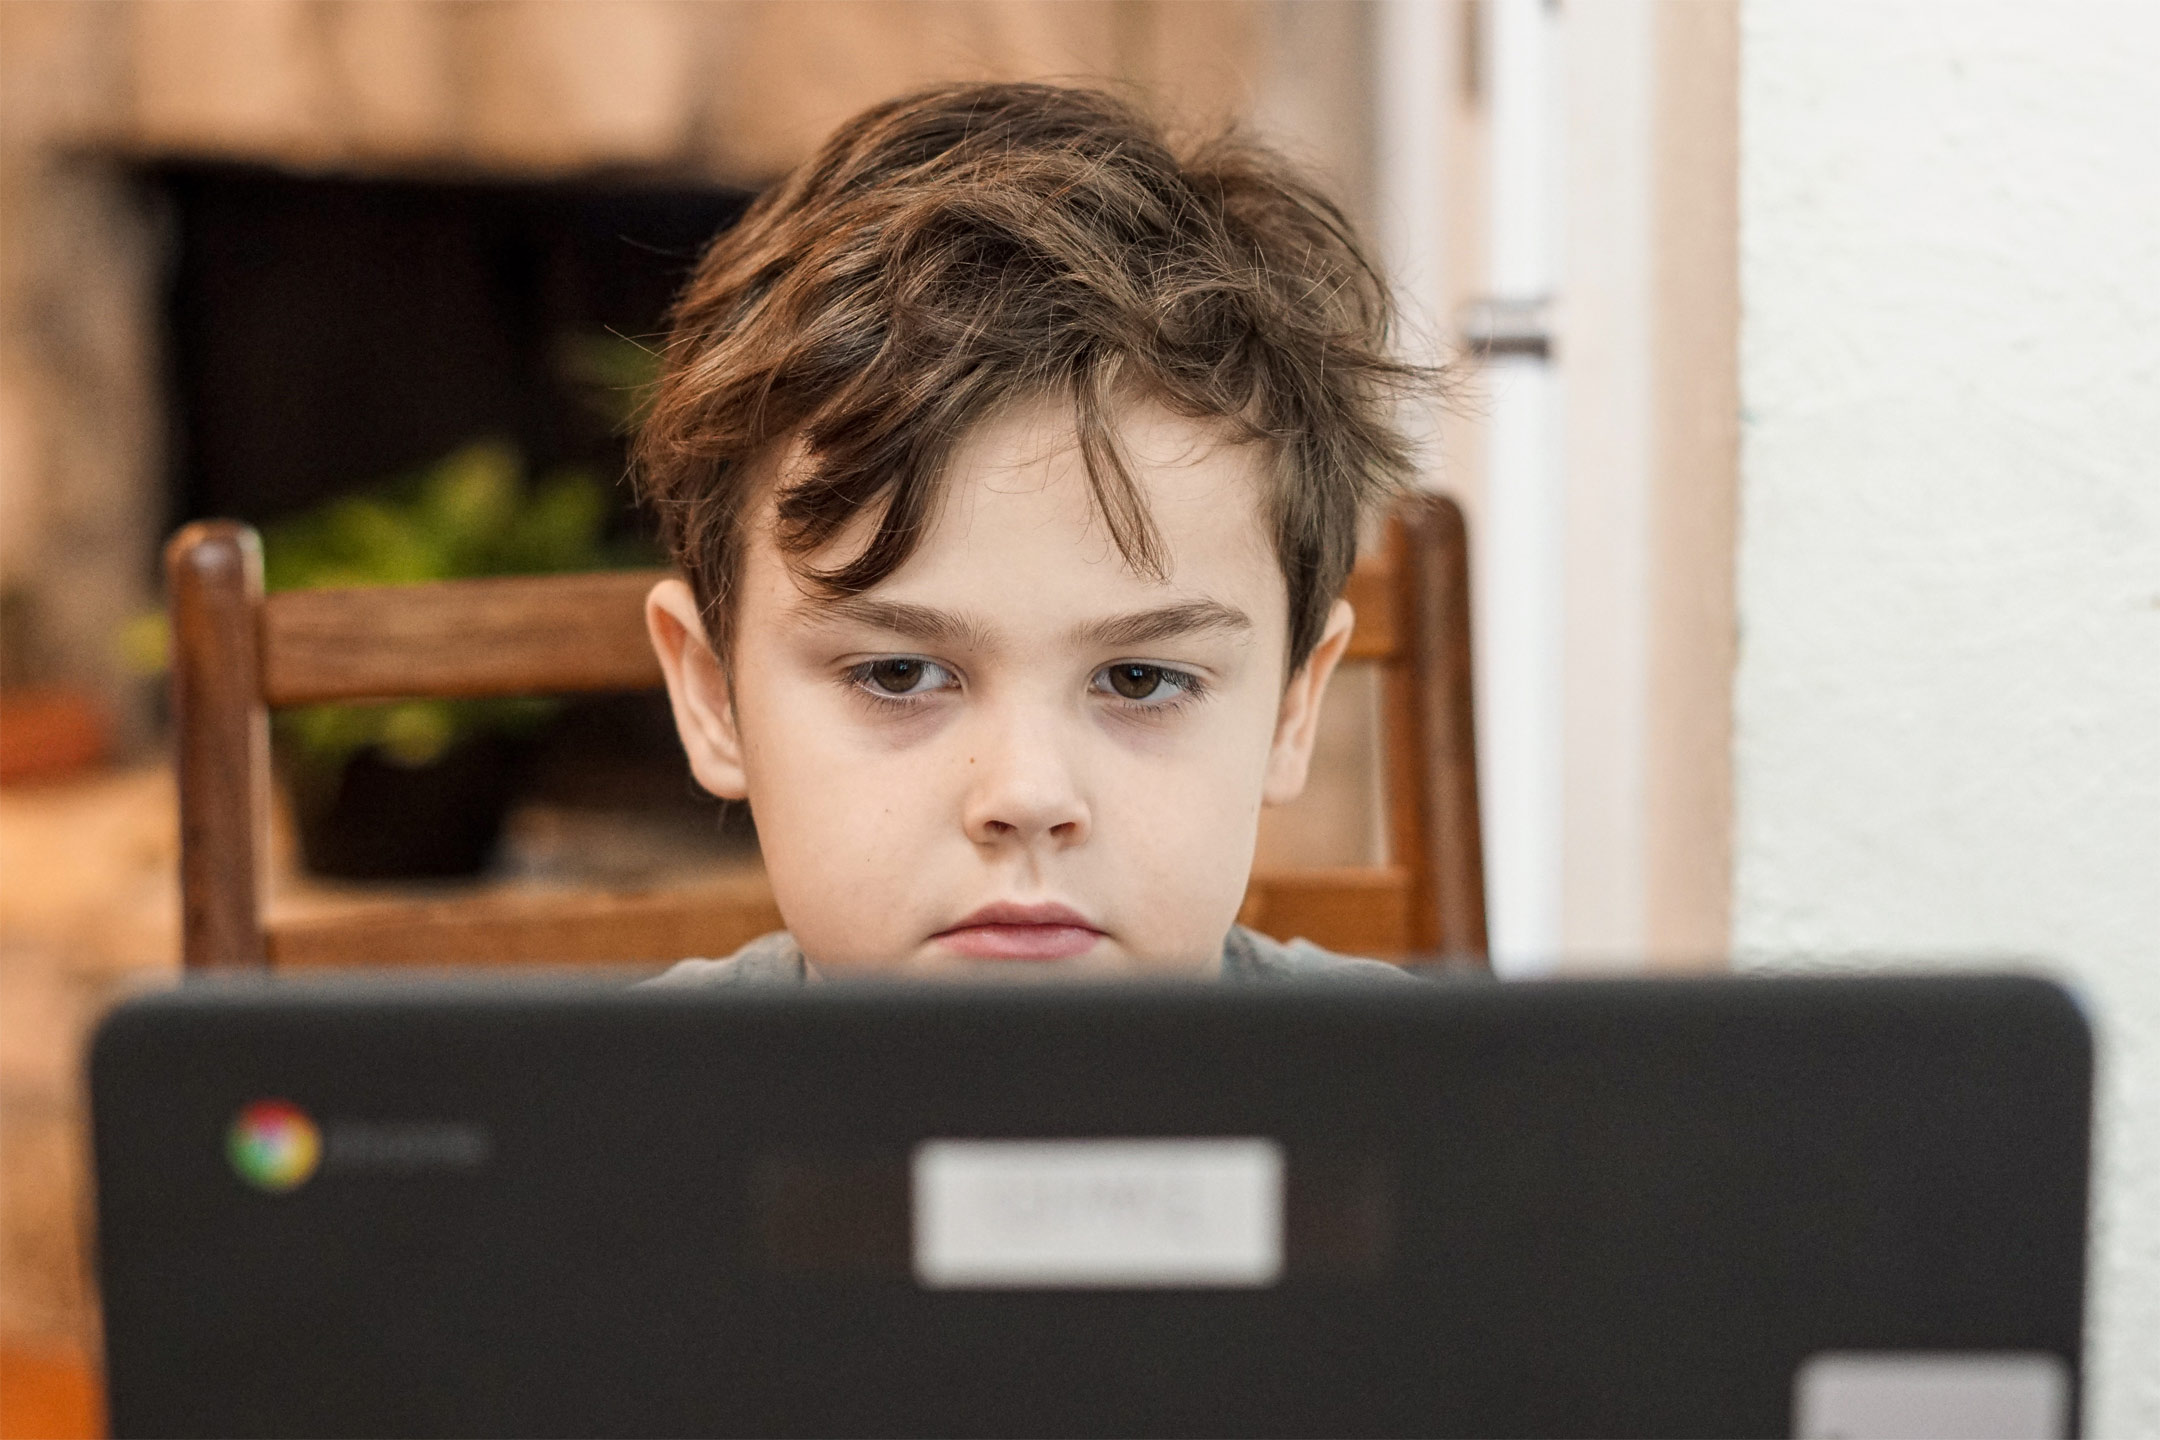 anxious-boy-child-looking-at-laptop2160